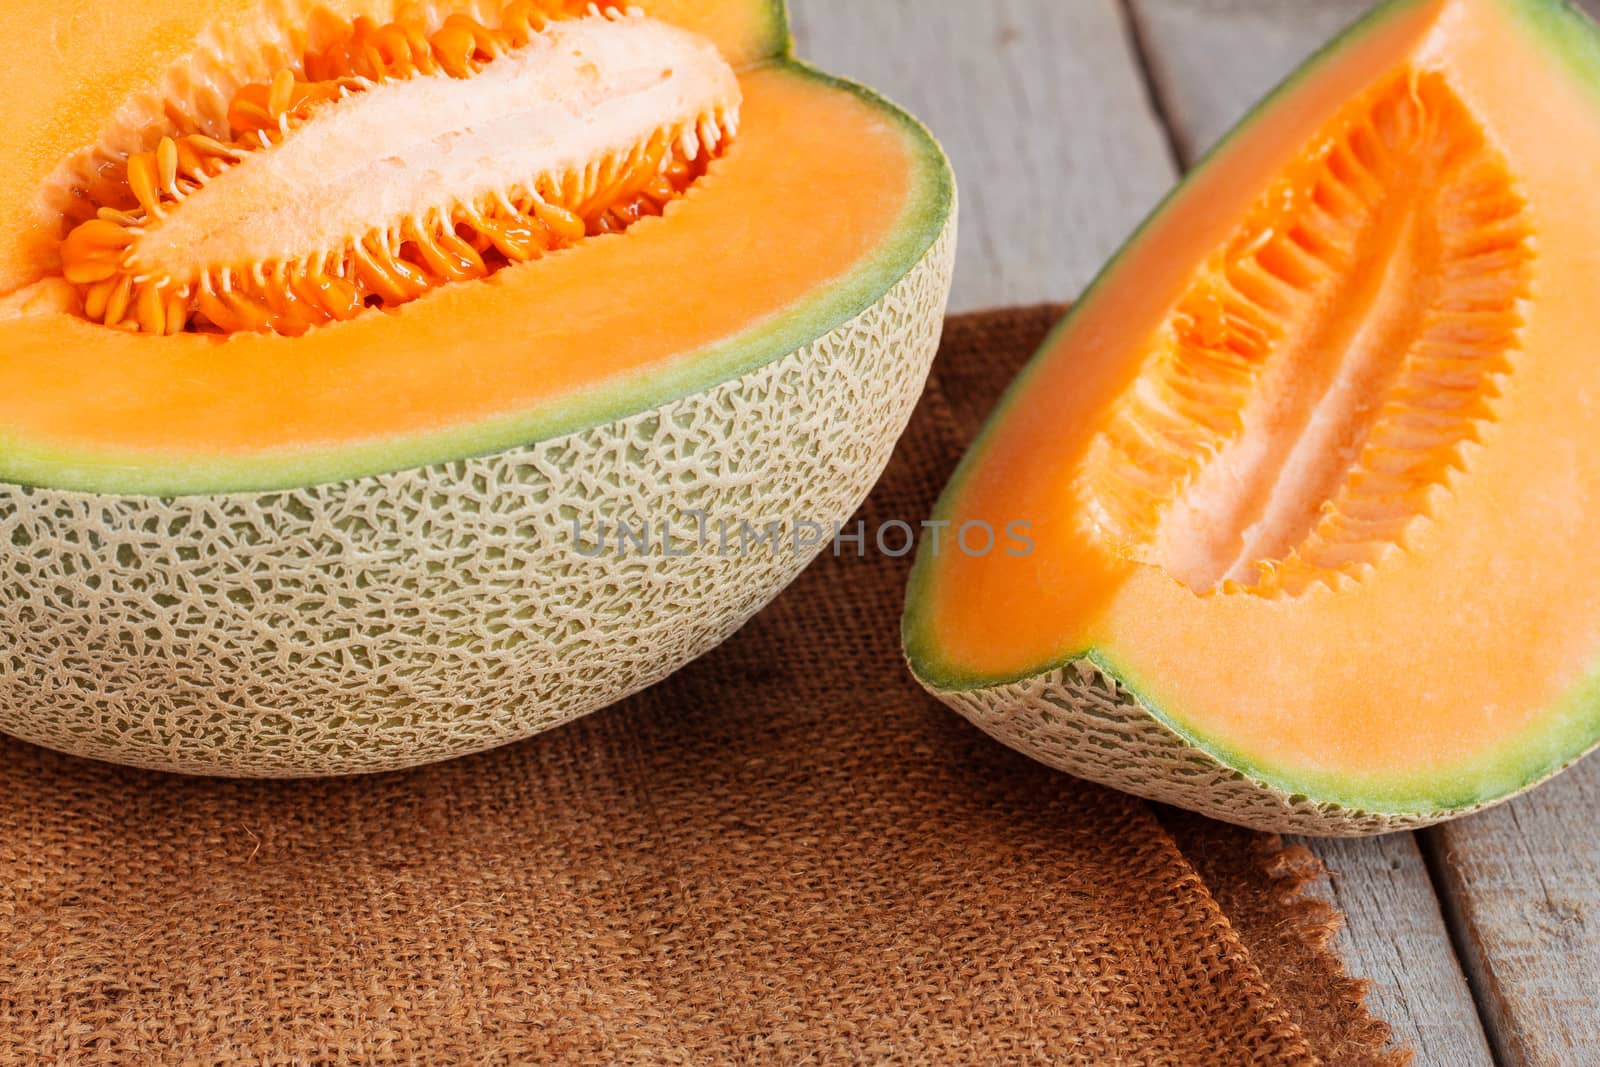 Melon sliced on sack of wooden table.